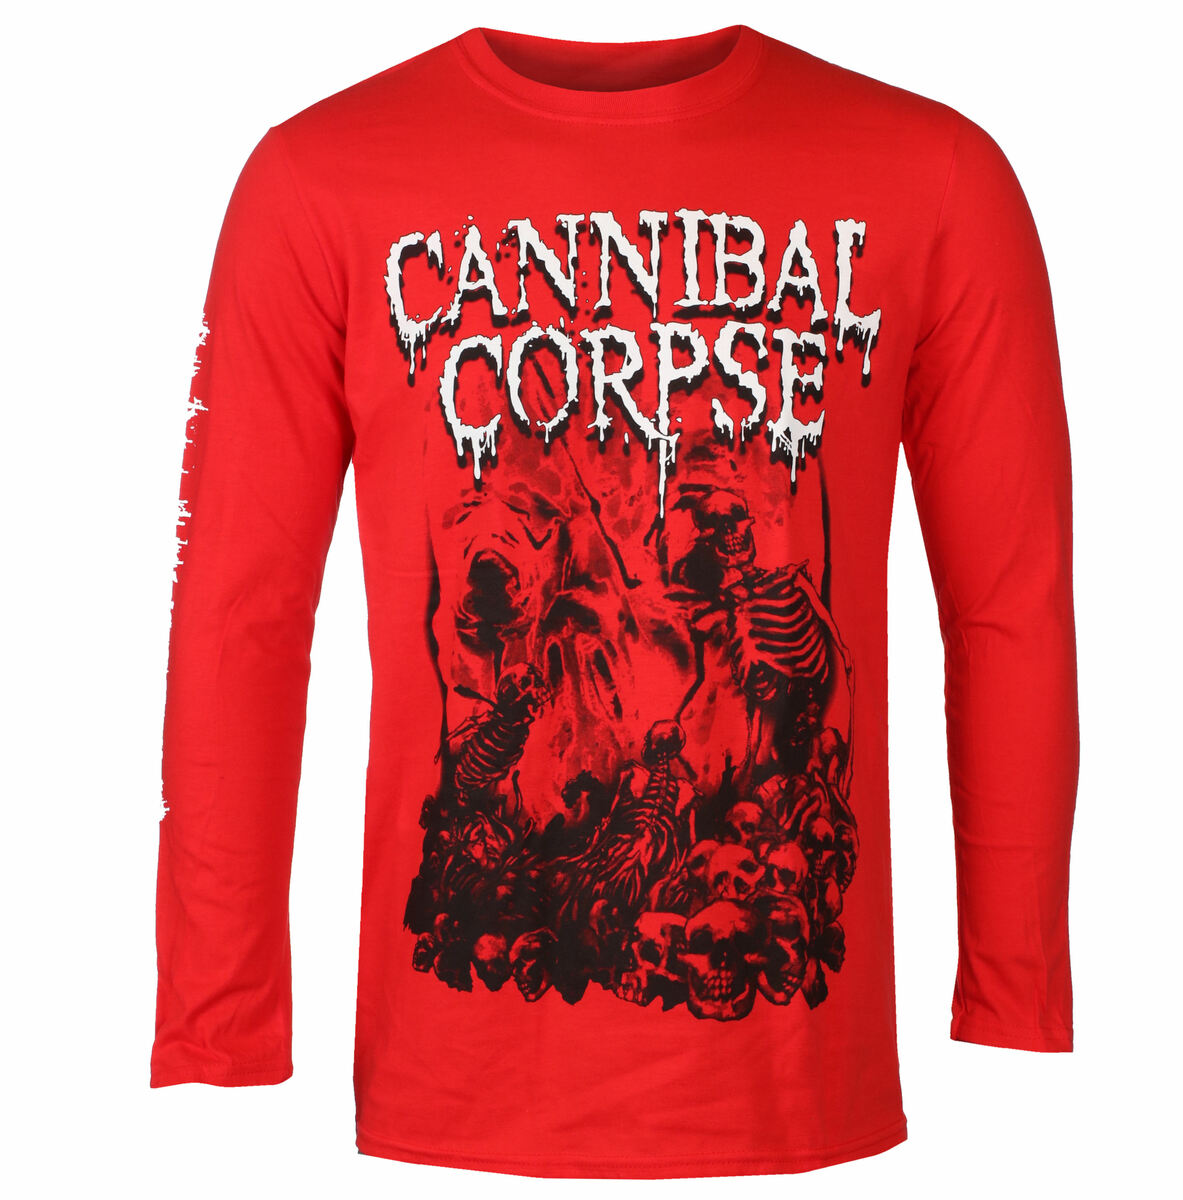 Cannibal Corpse - Pile Of Skulls Red